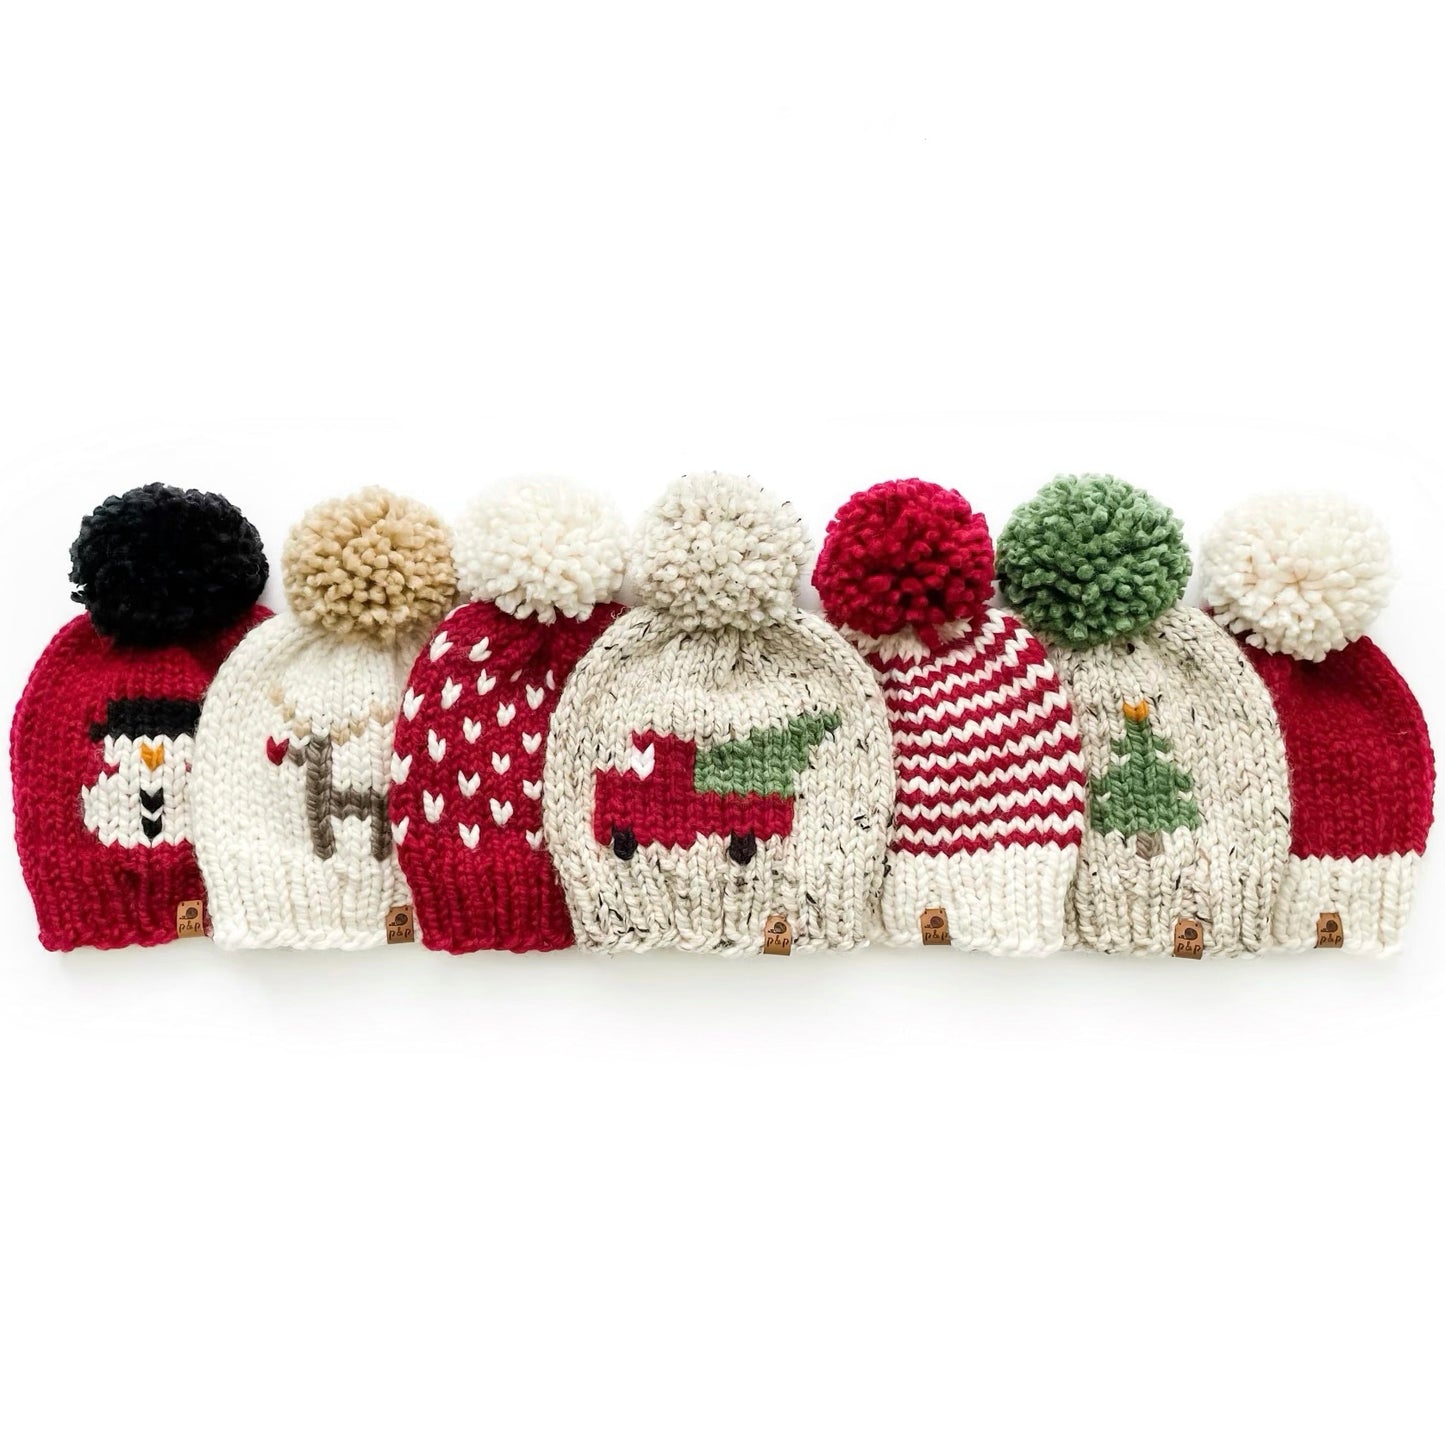 Classic Christmas Hats as pictured